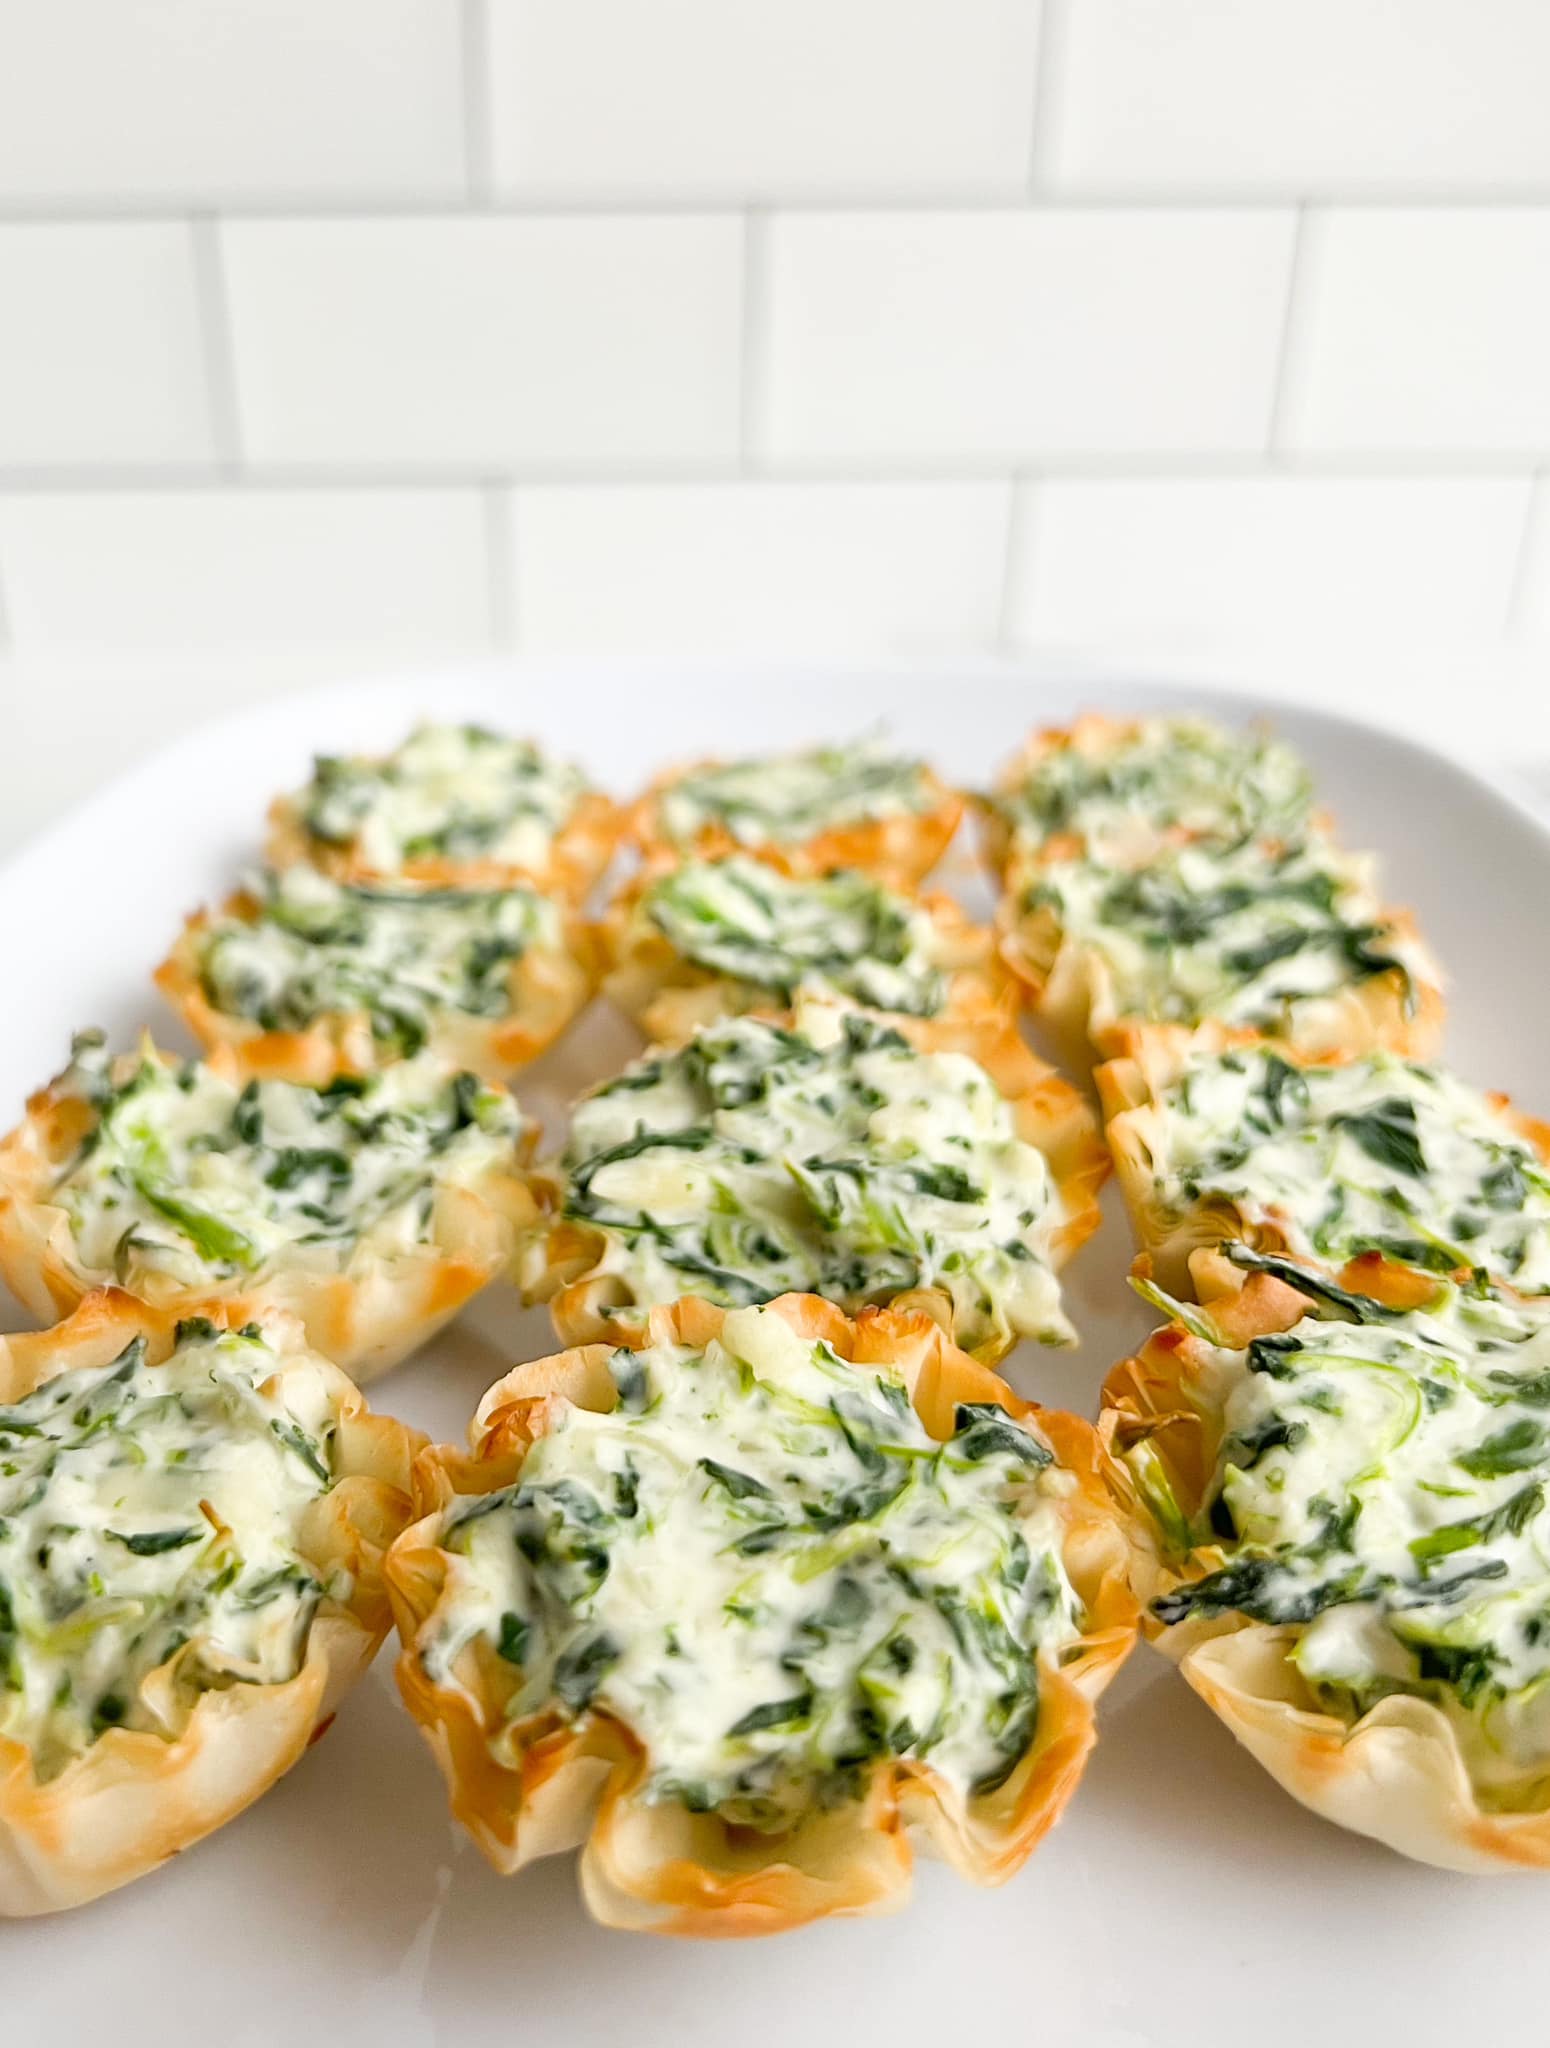 https://keepingonpoint.com/wp-content/uploads/2023/11/Spinach-and-Artichoke-Dip-Phyllo-Cups-Weight-Watchers-Recipes-WW-Recipes.jpg